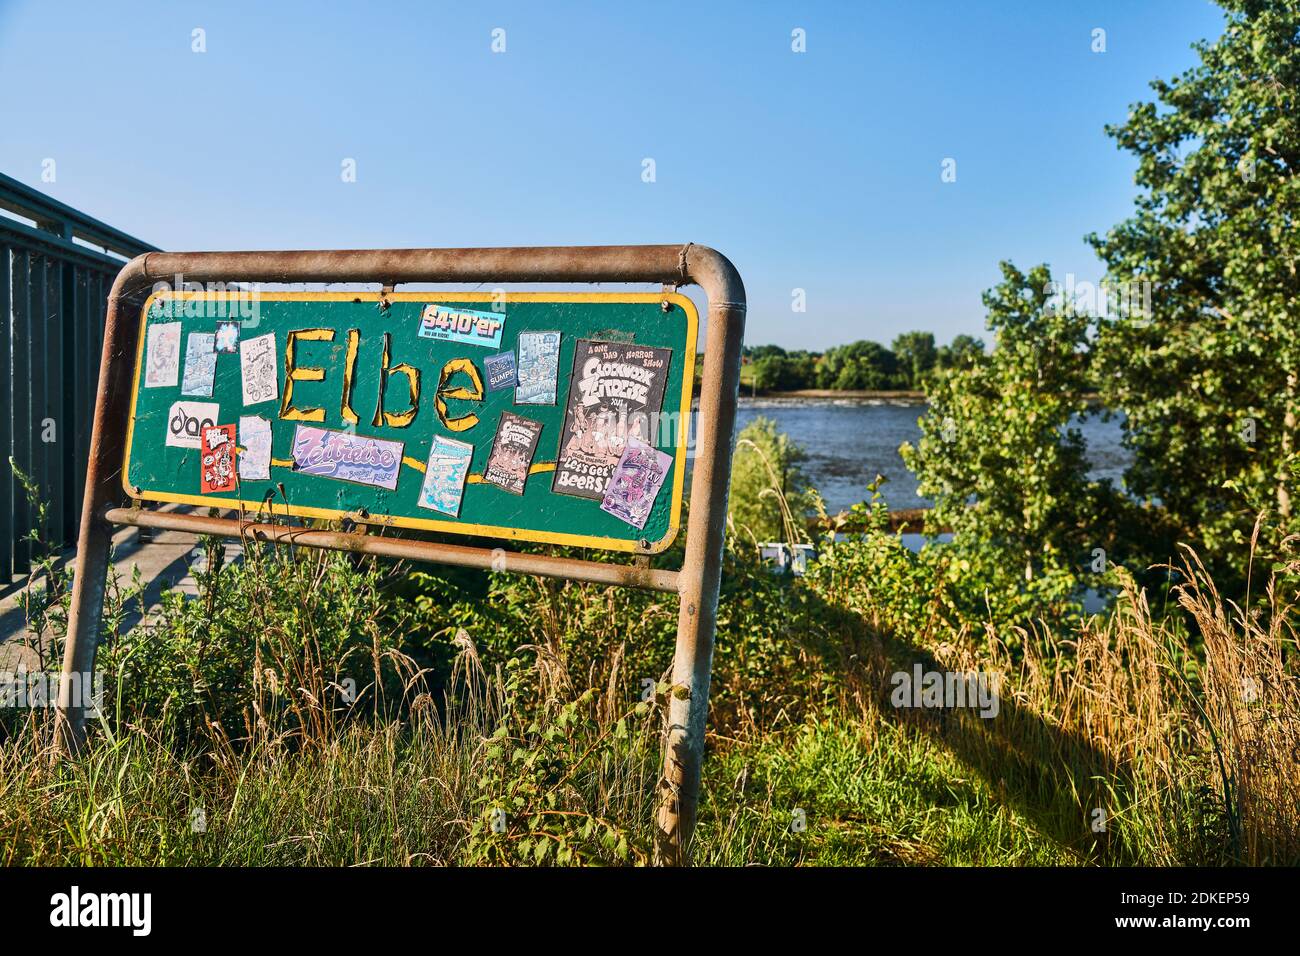 Traffic infrastructure, information sign, Germany, Northern Germany, Schleswig-Holstein, Elbe, Elbe bridge Geesthacht, green sign on the road bridge of the B404, writing Elbe, weathered stickers Stock Photo